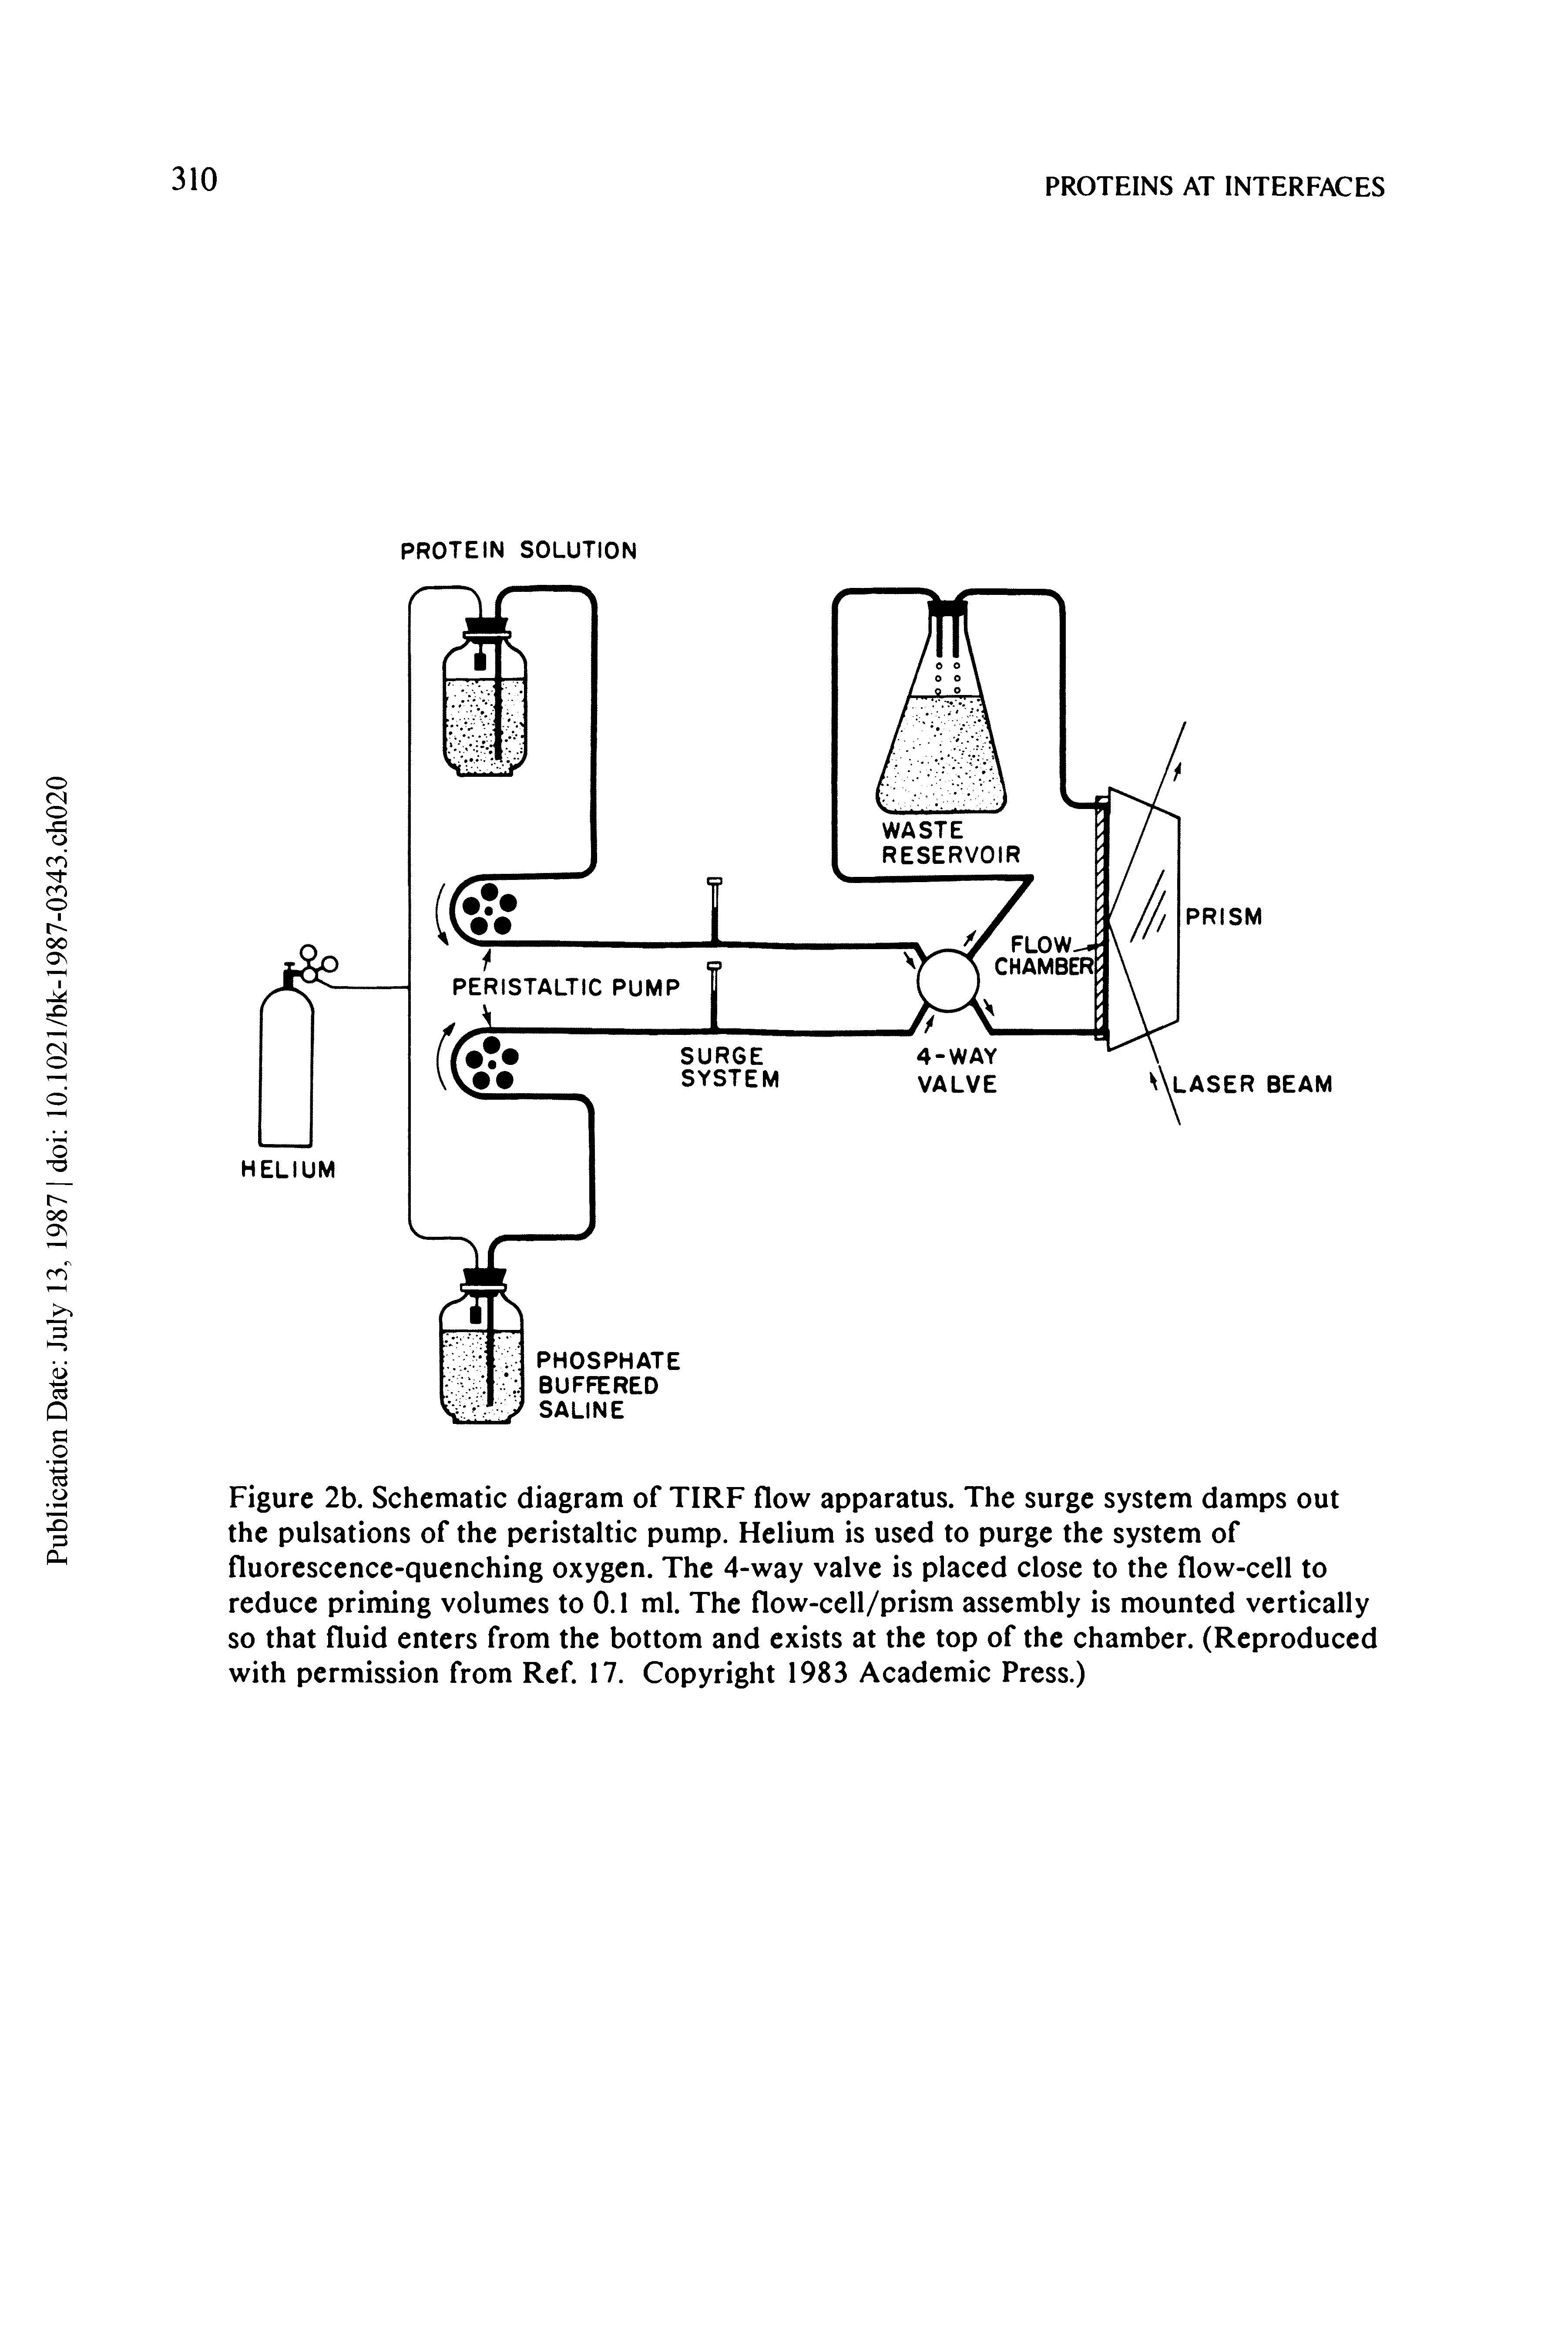 Figure 2b. Schematic diagram of TIRF flow apparatus. The surge system damps out the pulsations of the peristaltic pump. Helium is used to purge the system of fluorescence-quenching oxygen. The 4-way valve is placed close to the flow-cell to reduce priming volumes to 0.1 ml. The flow-cell/prism assembly is mounted vertically so that fluid enters from the bottom and exists at the top of the chamber. (Reproduced with permission from Ref. 17. Copyright 1983 Academic Press.)...